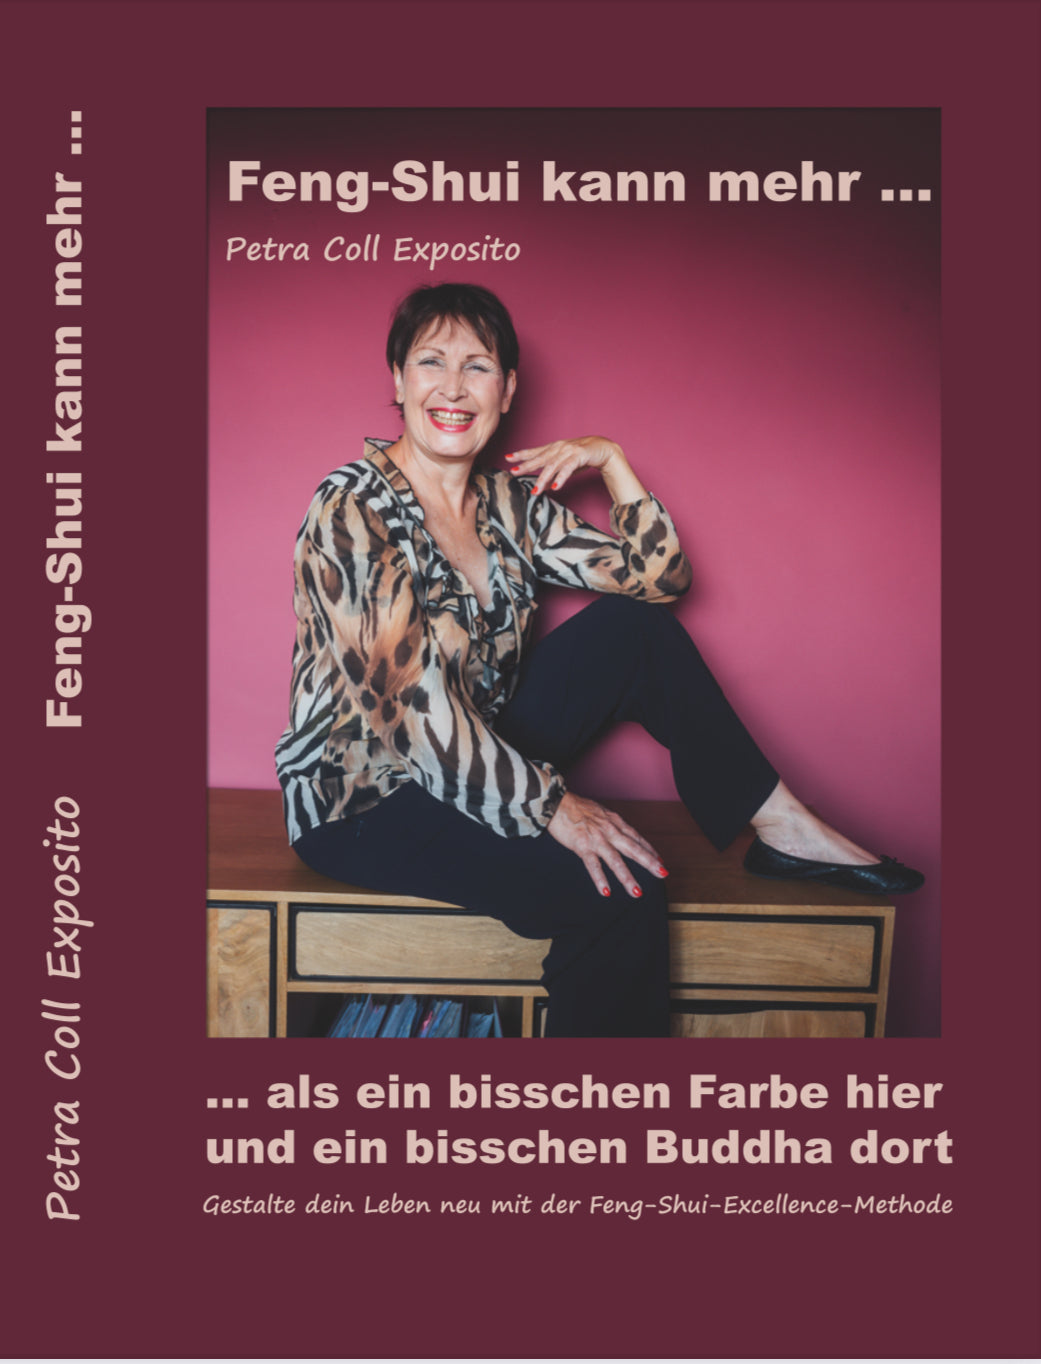 Book "Feng Shui can do more than a bit of color here and a bit of Buddha there!"